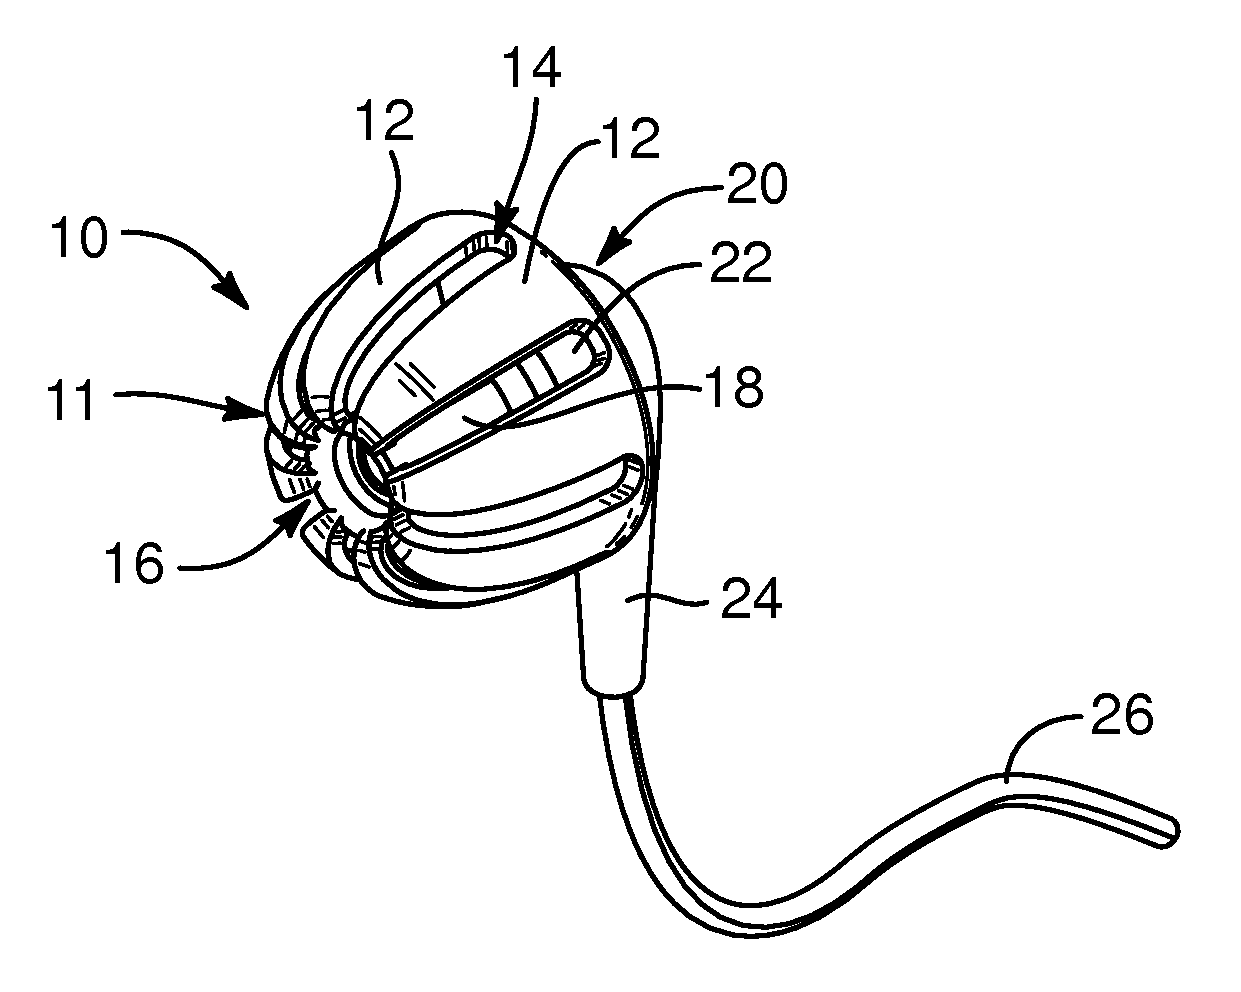 Audio-bypass, safety earbud apparatus and method